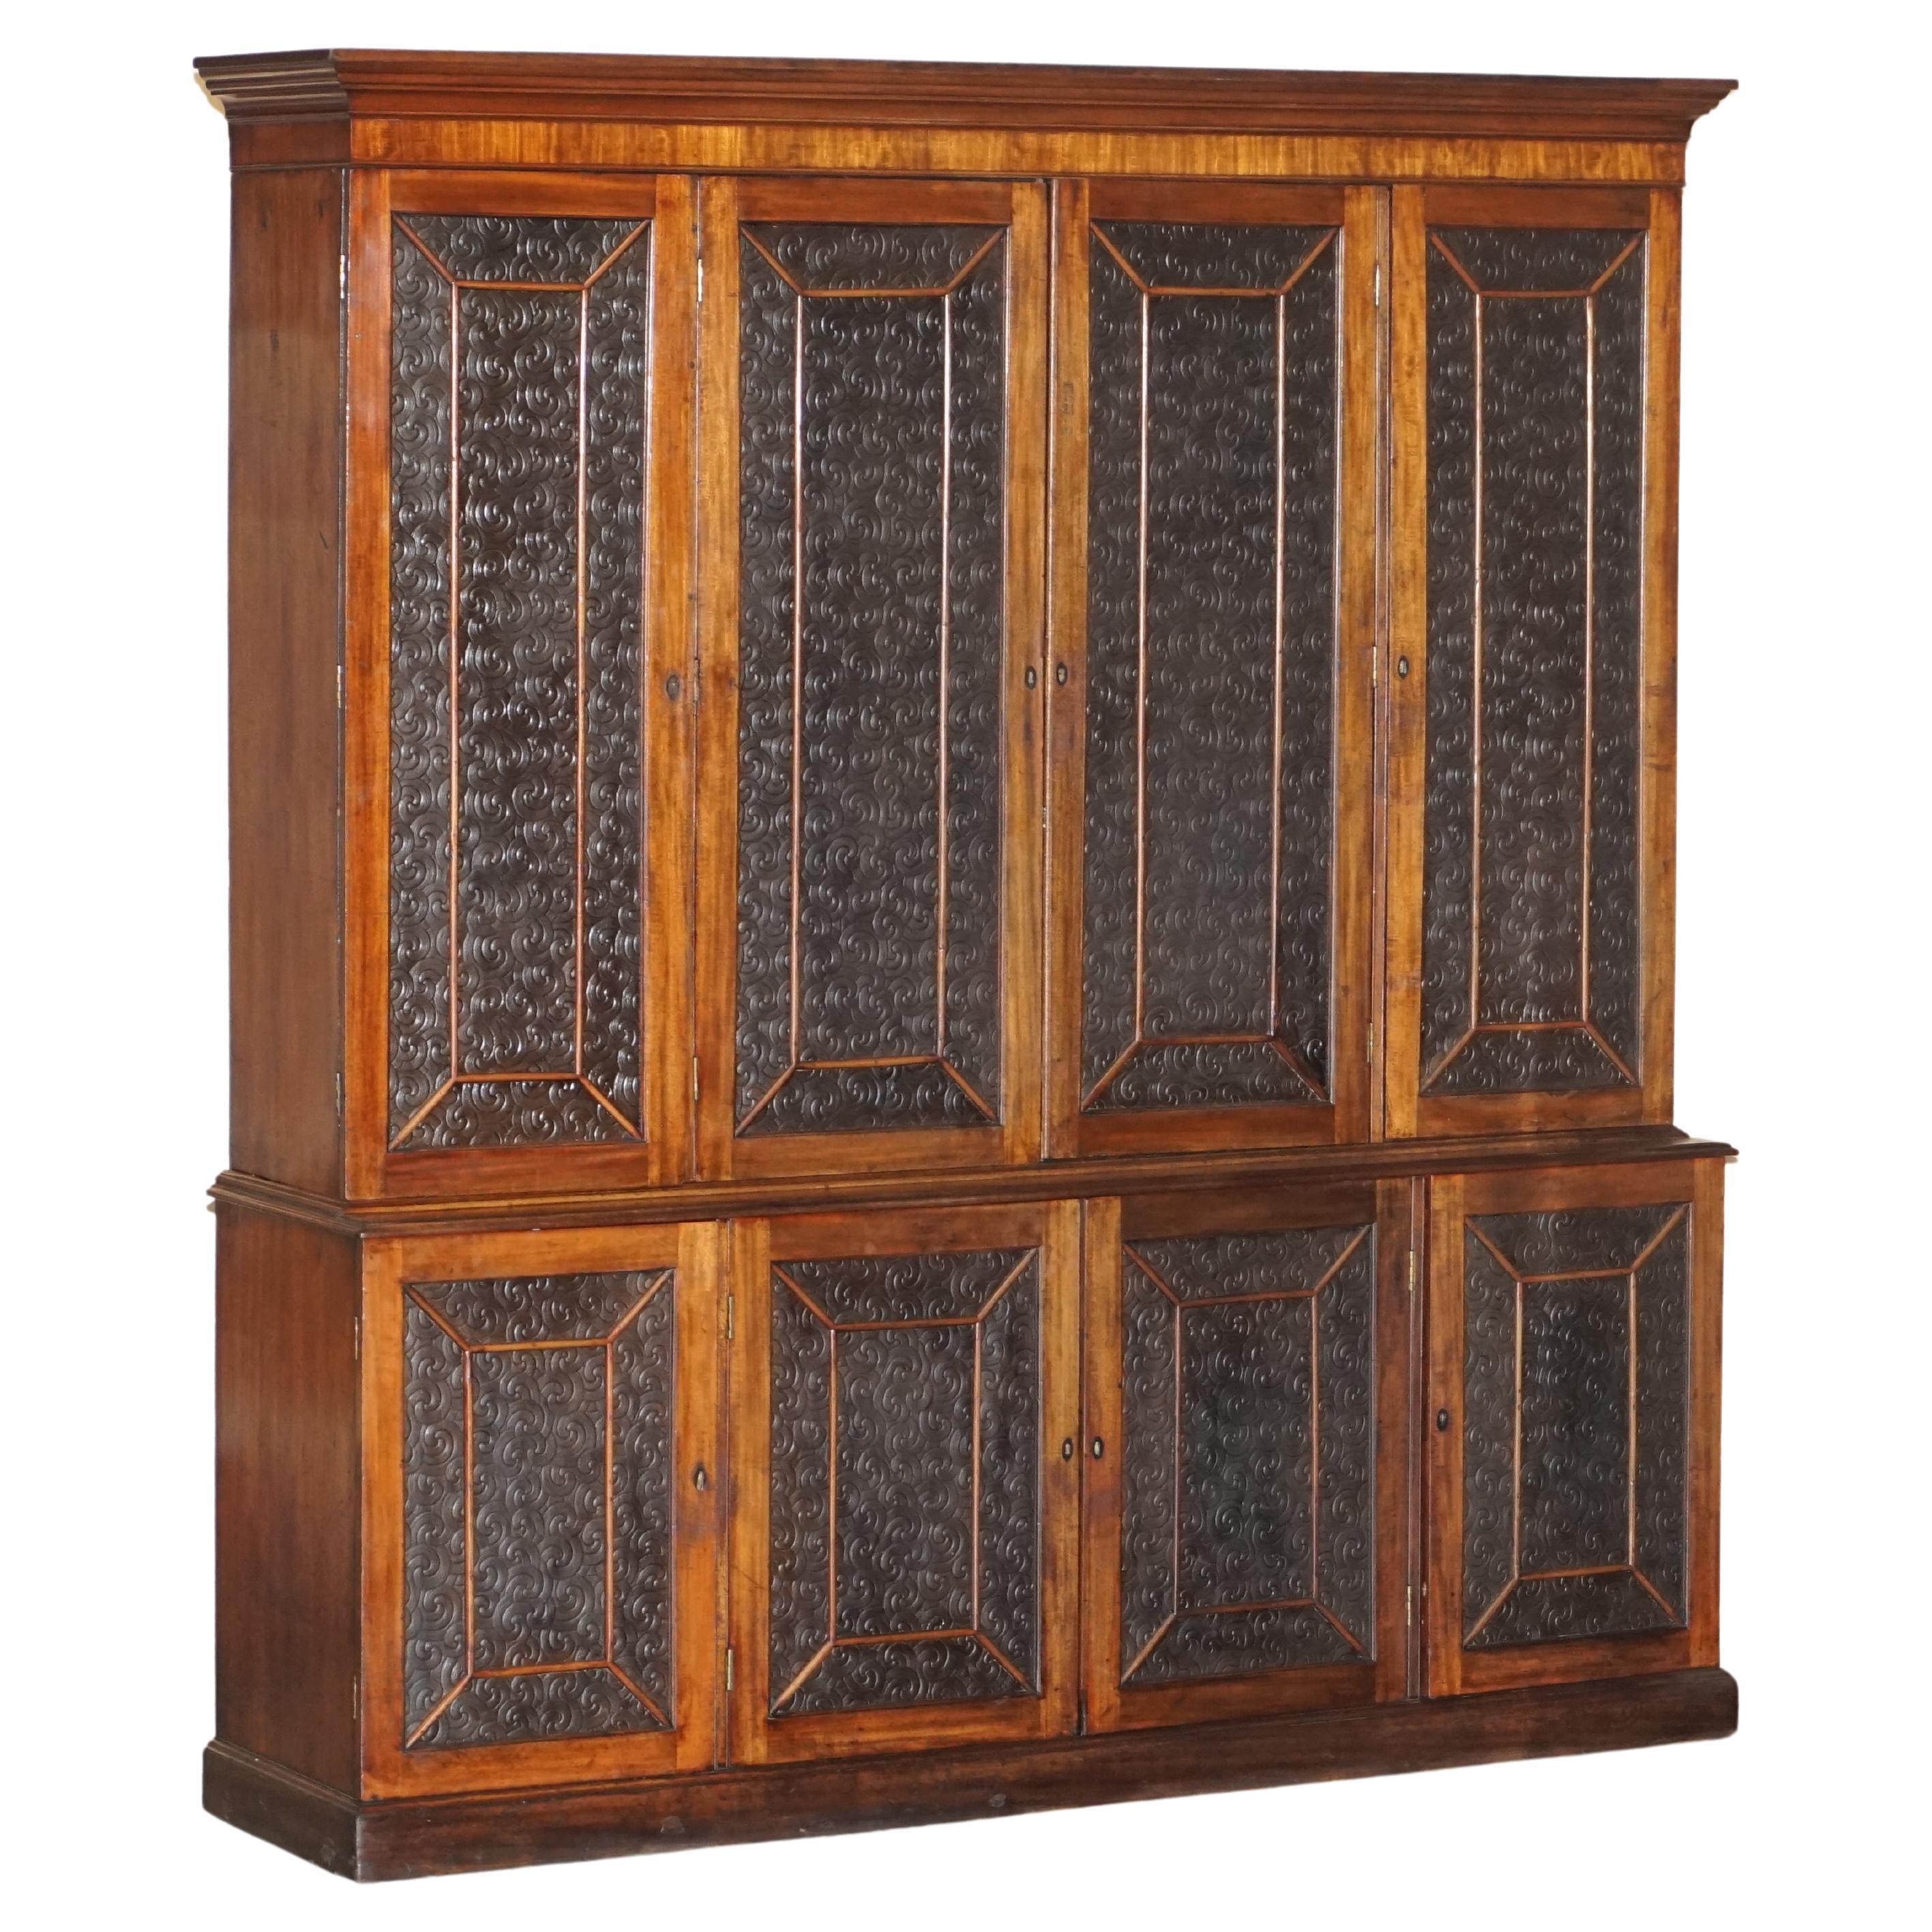 Stunning Antique Victorian Hardwood & Embossed Leather Library Bookcase Cupboard